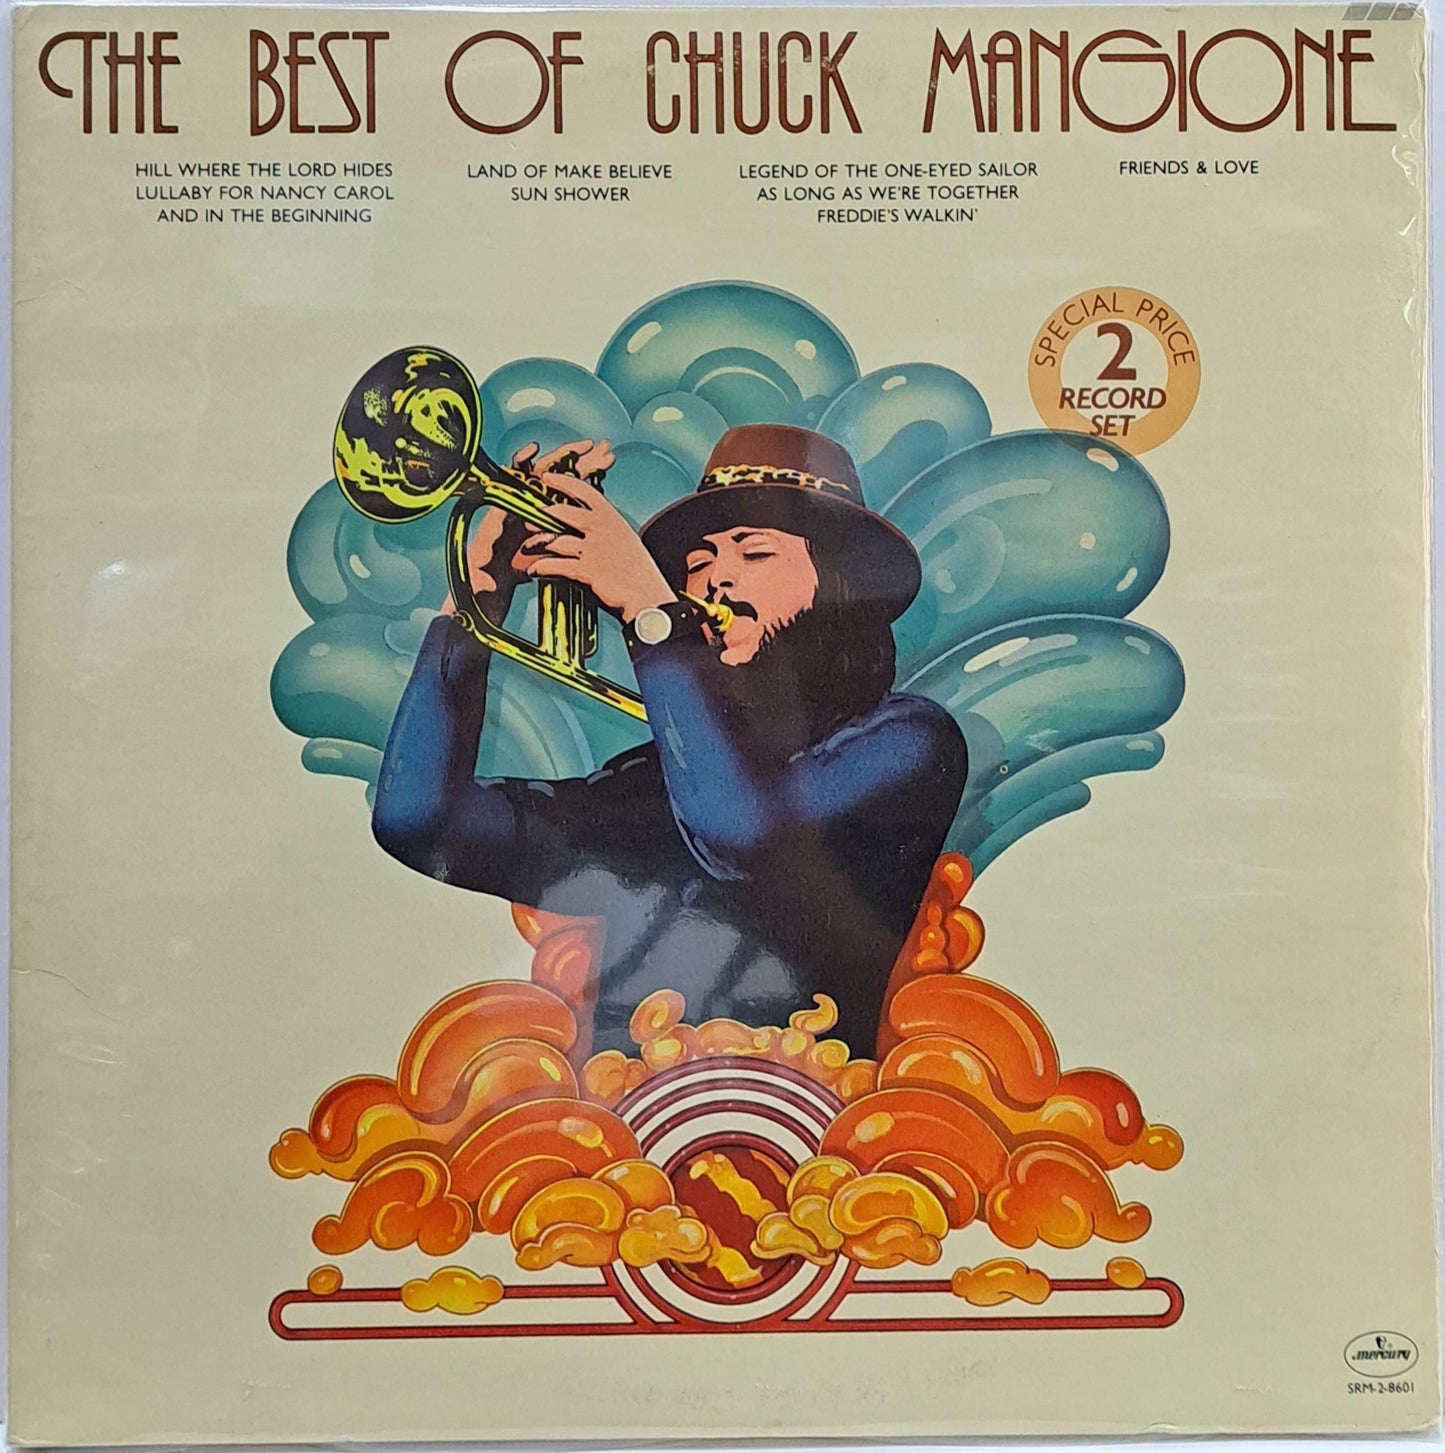 CHUCK MANGIONE - THE BEST OF  LP